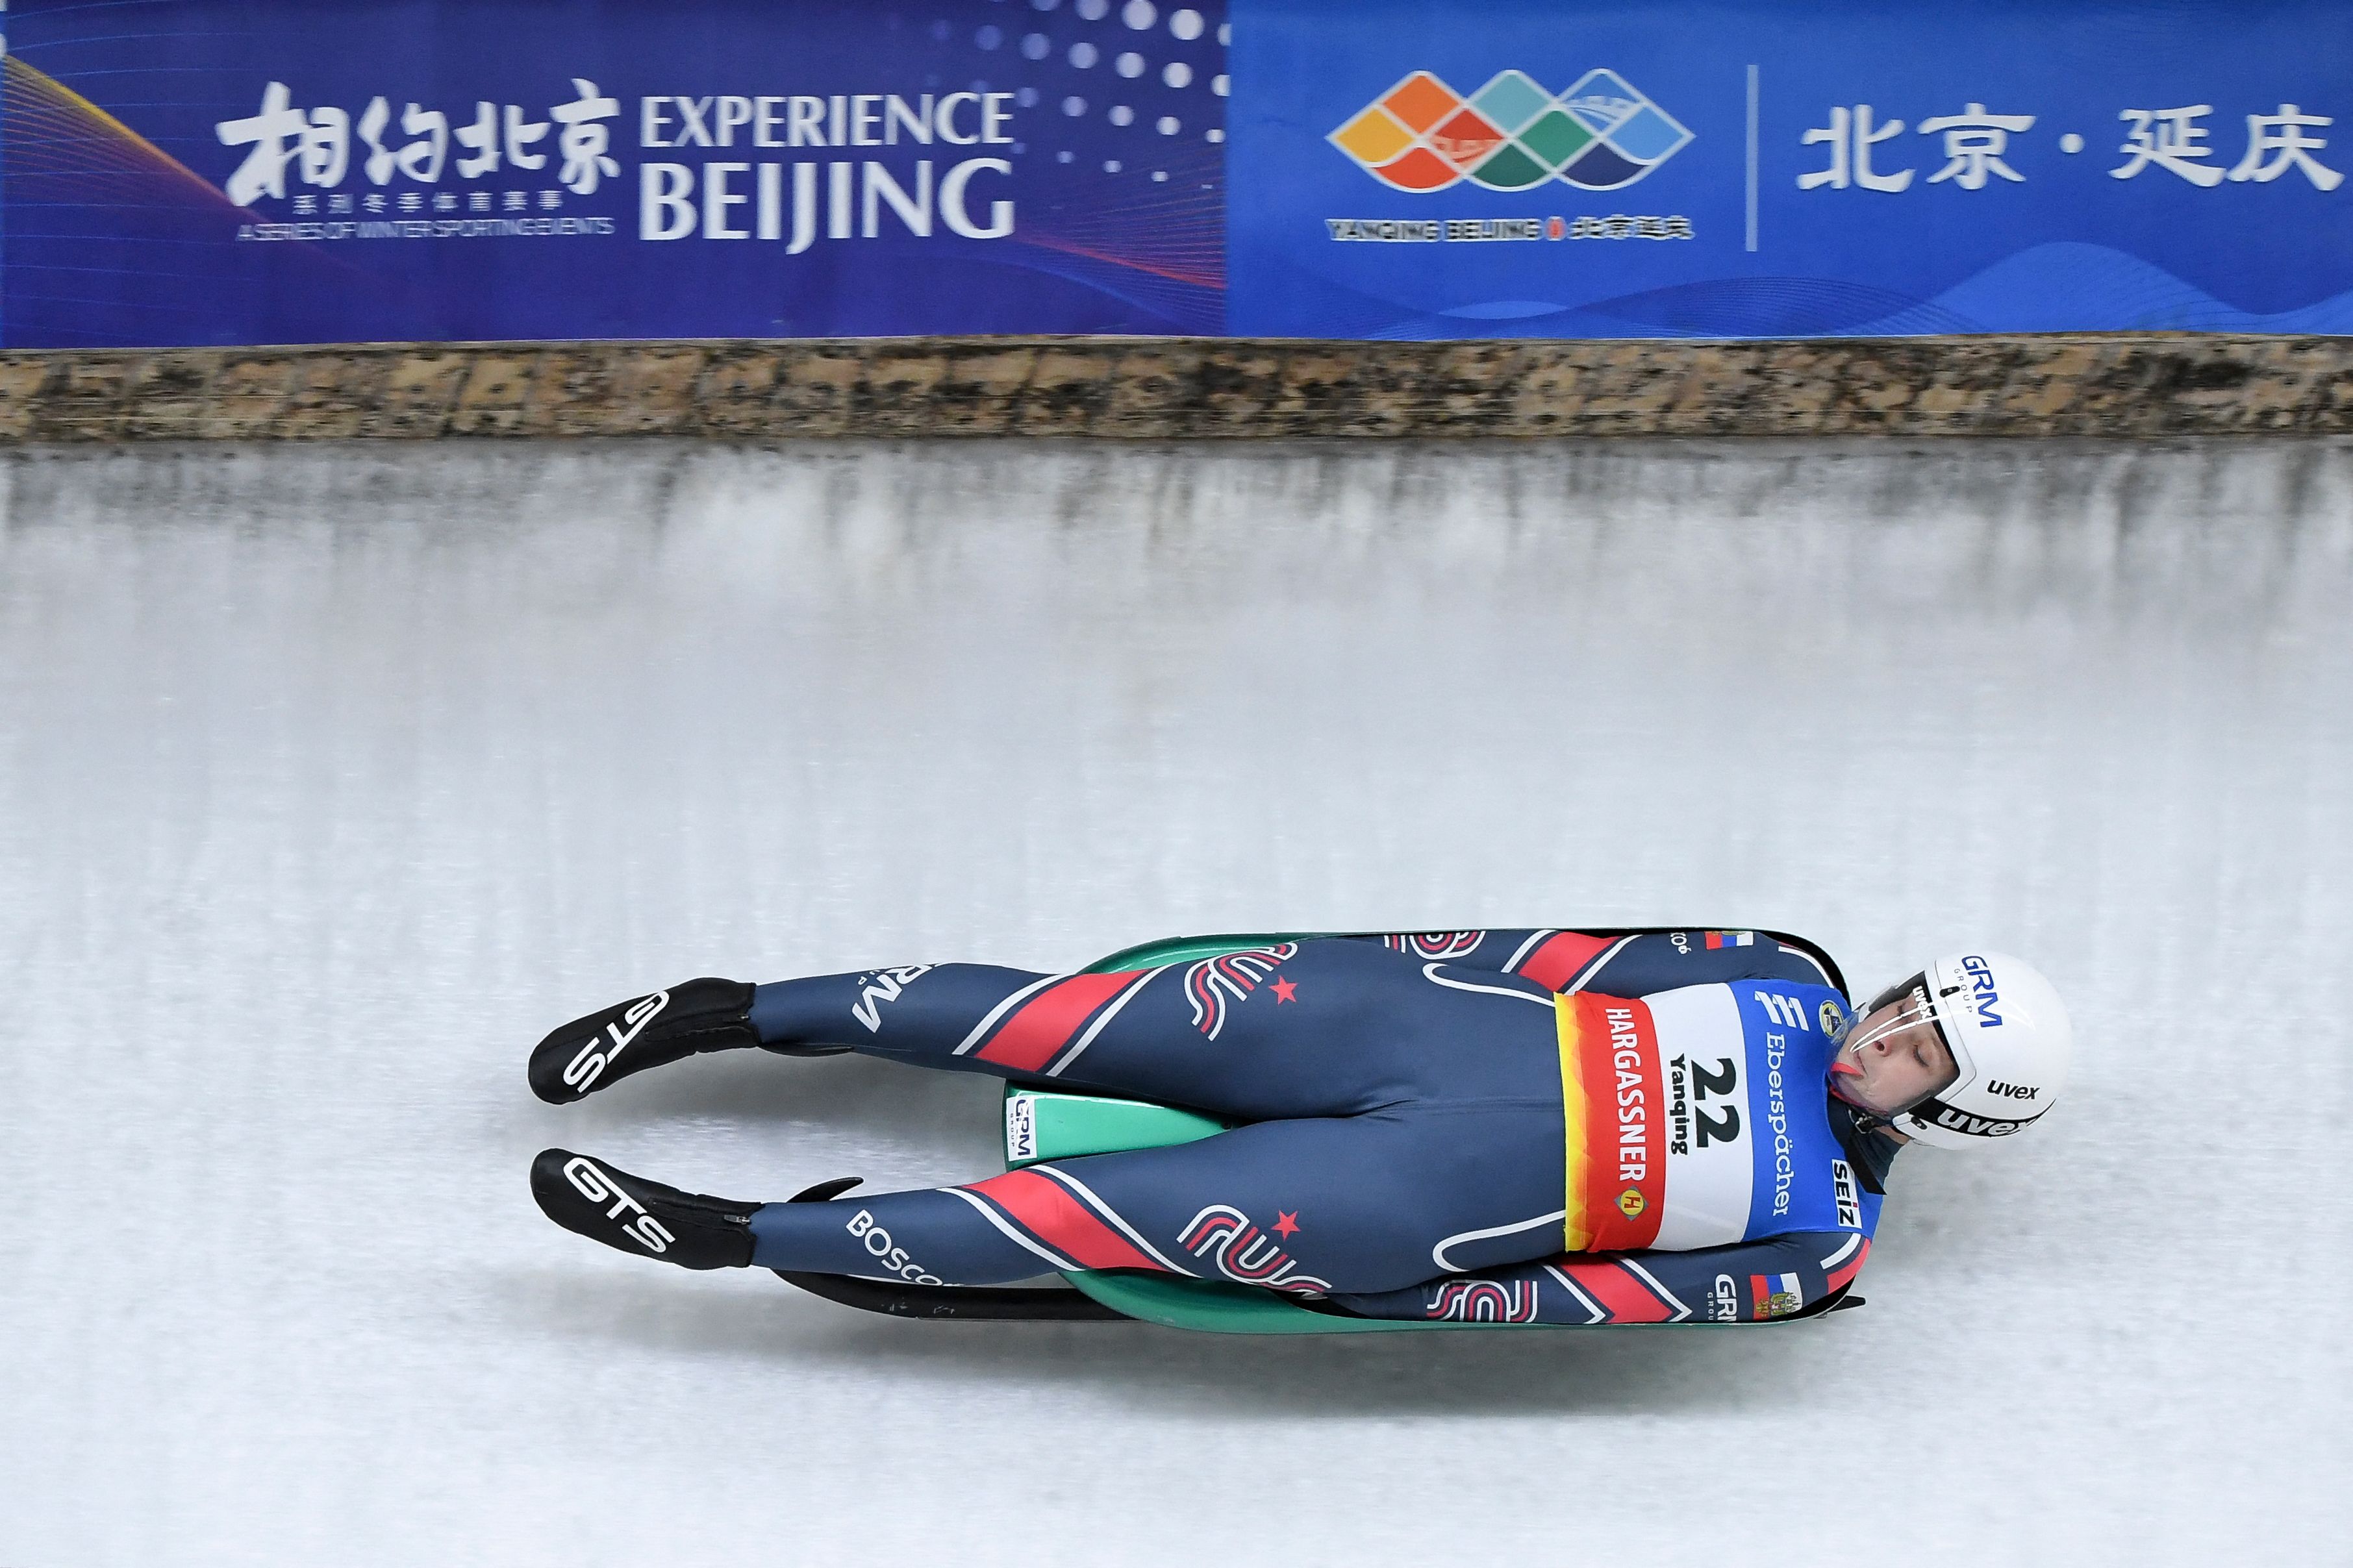 A 2022 Beijing Winter Olympic Games test event.